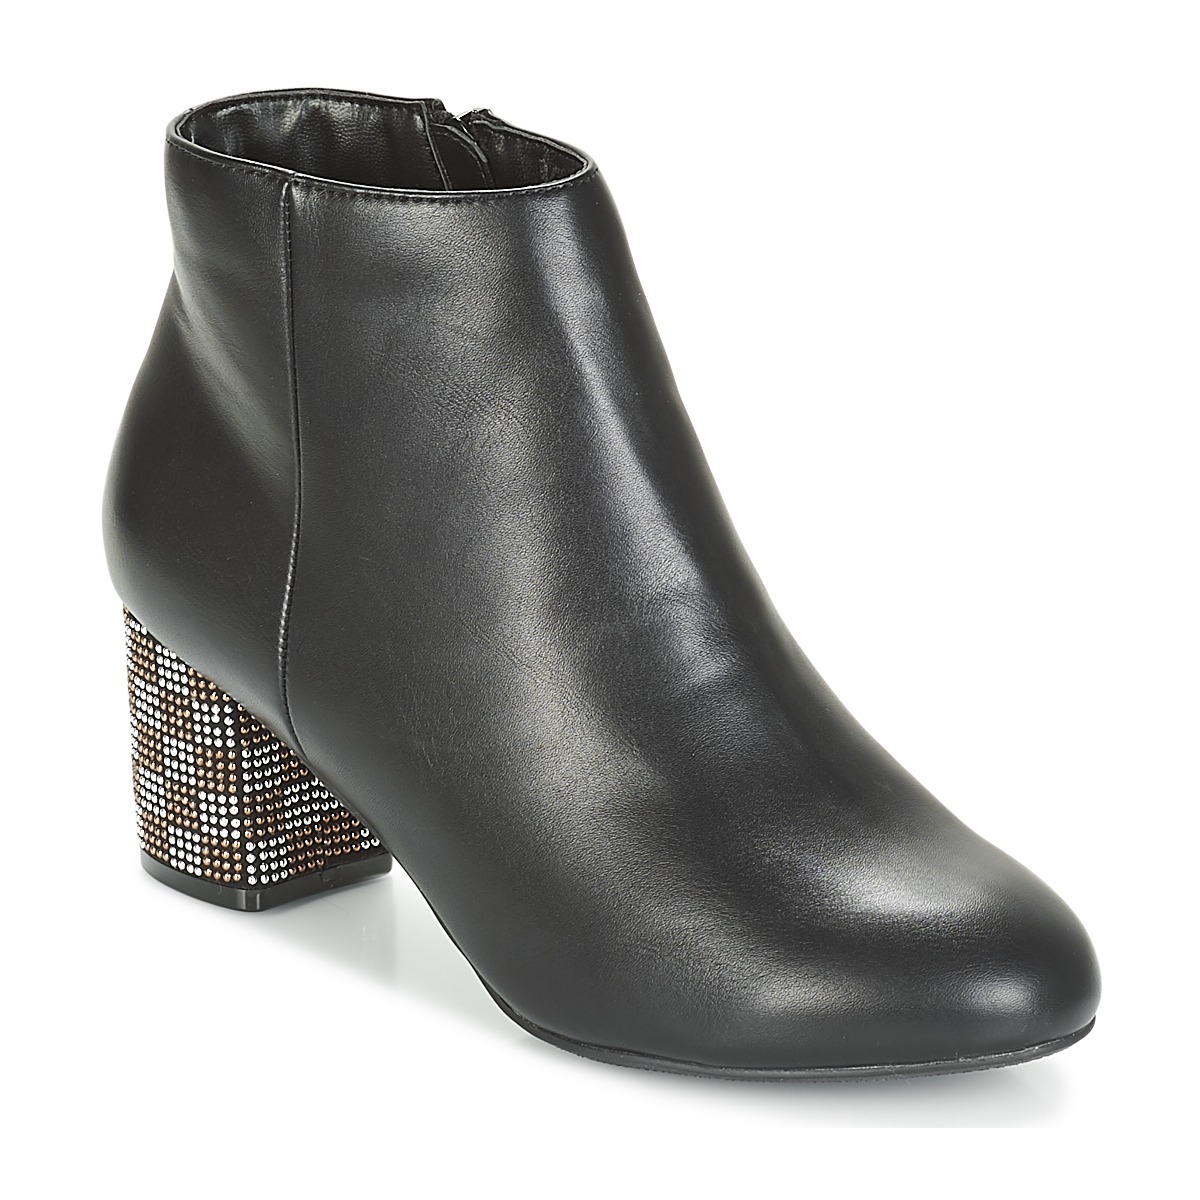 Spartoo - Lady Ankle Boots in Black from Moony Mood GOOFASH